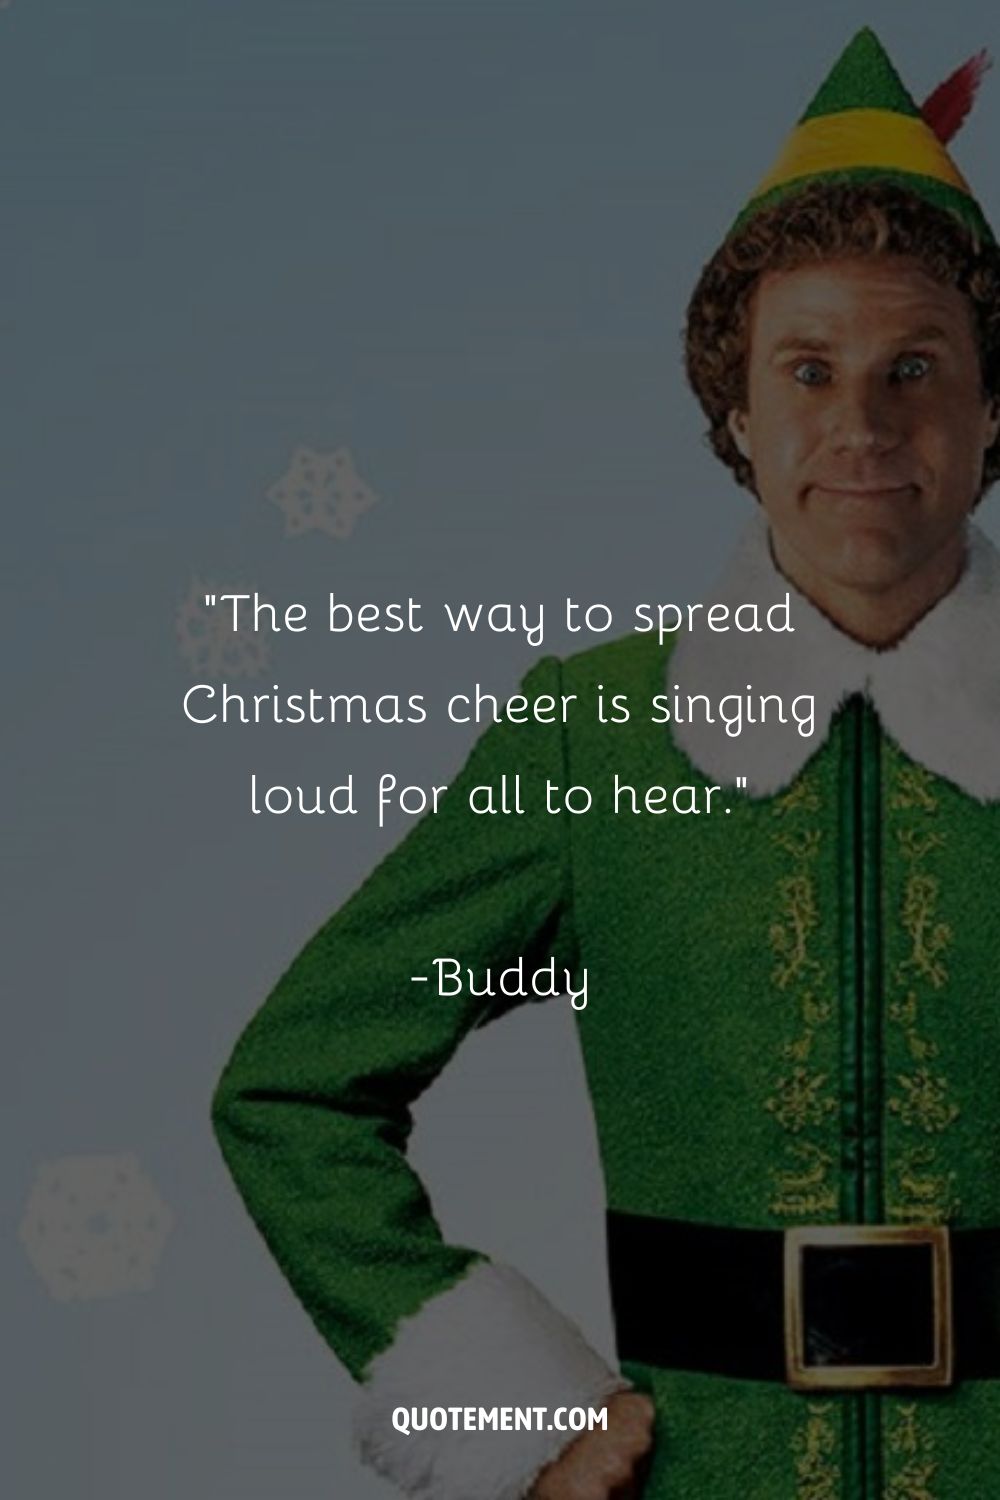 Image of Buddy the Elf standing representing the greatest Elf quote.